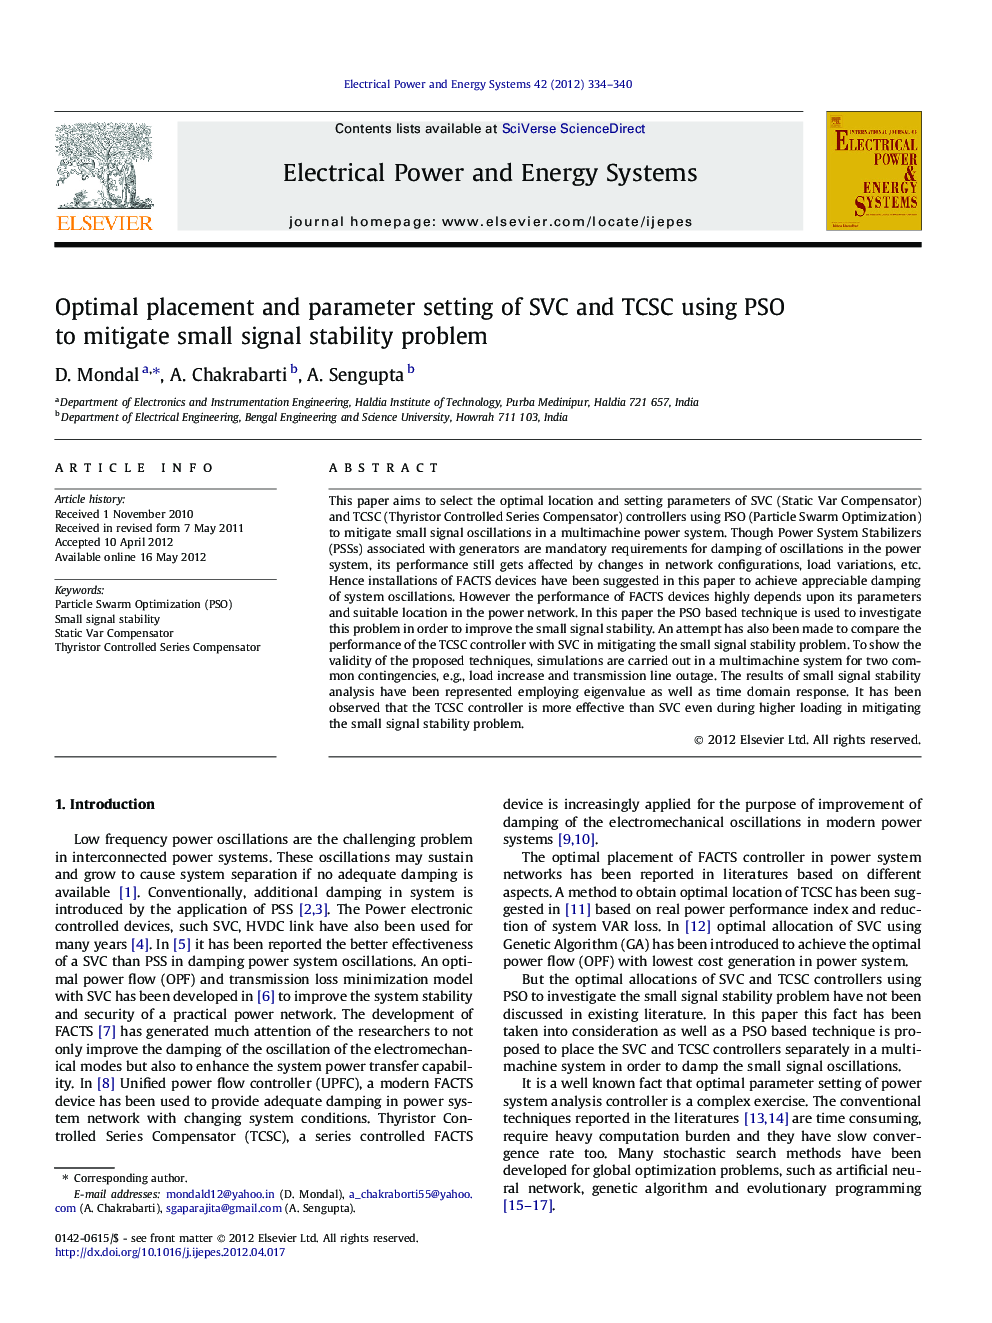 Optimal placement and parameter setting of SVC and TCSC using PSO to mitigate small signal stability problem